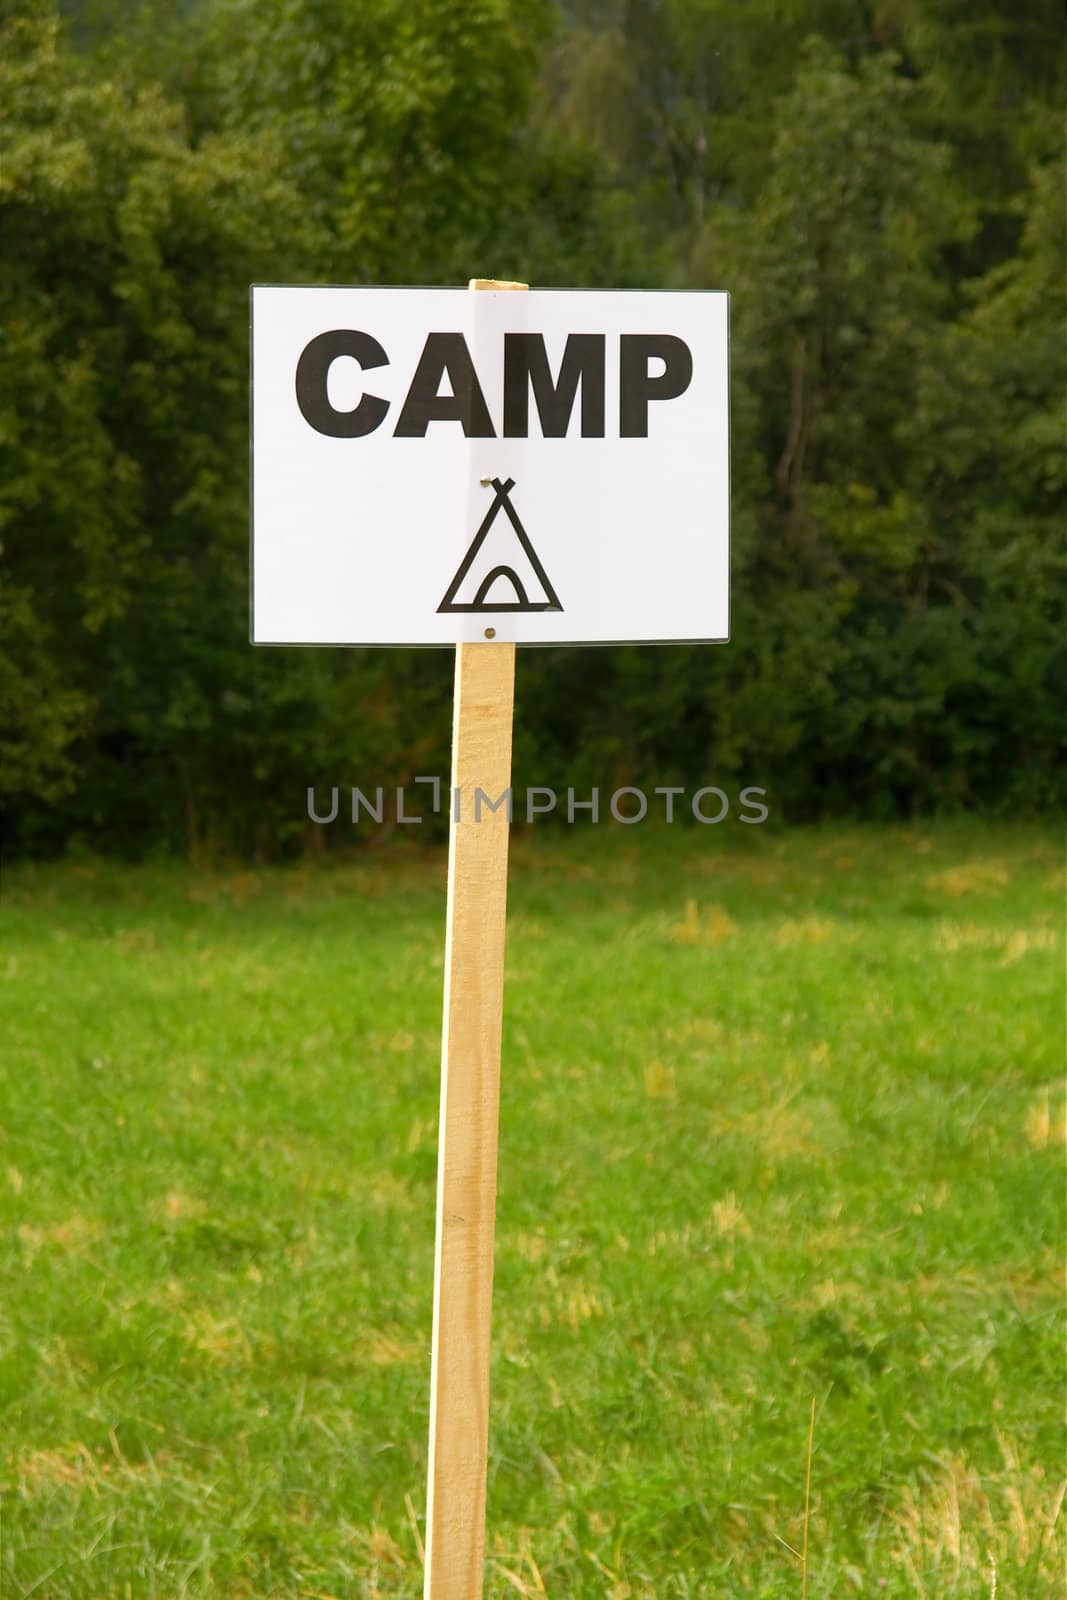 Camping sign on a field